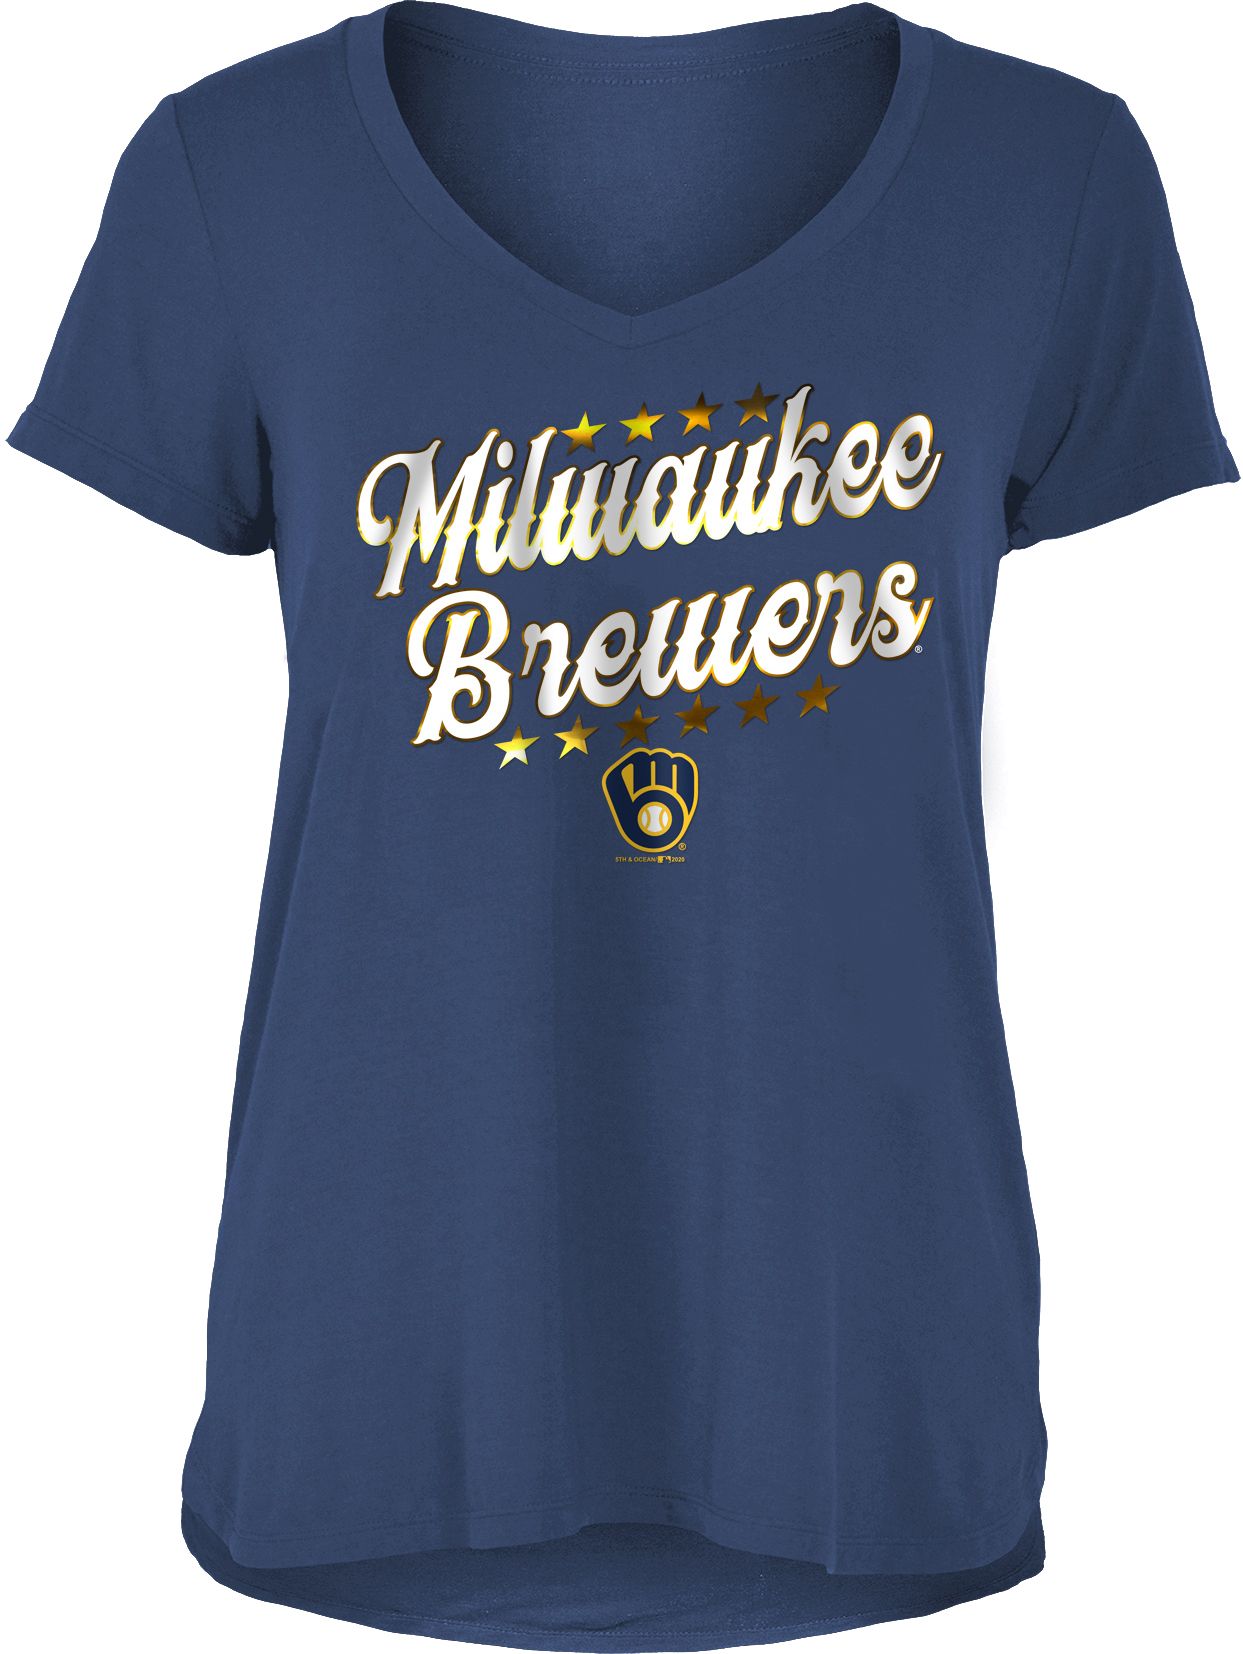 women's plus size brewers shirts